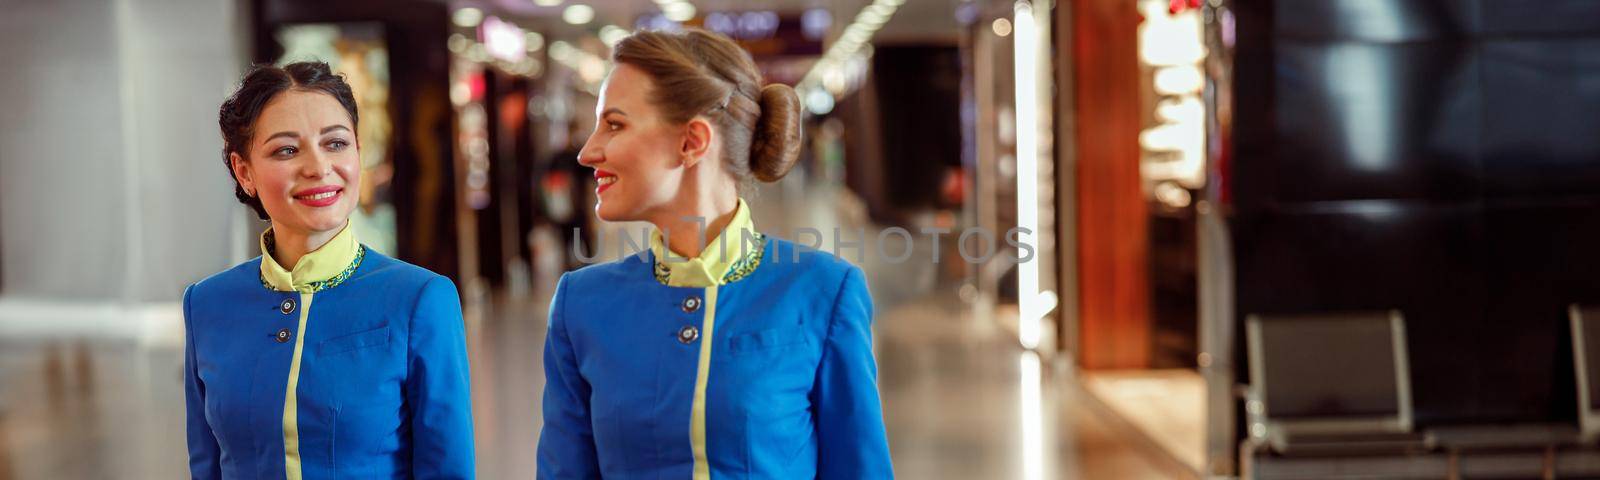 Smiling flight attendants carrying travel bags at airport by Yaroslav_astakhov